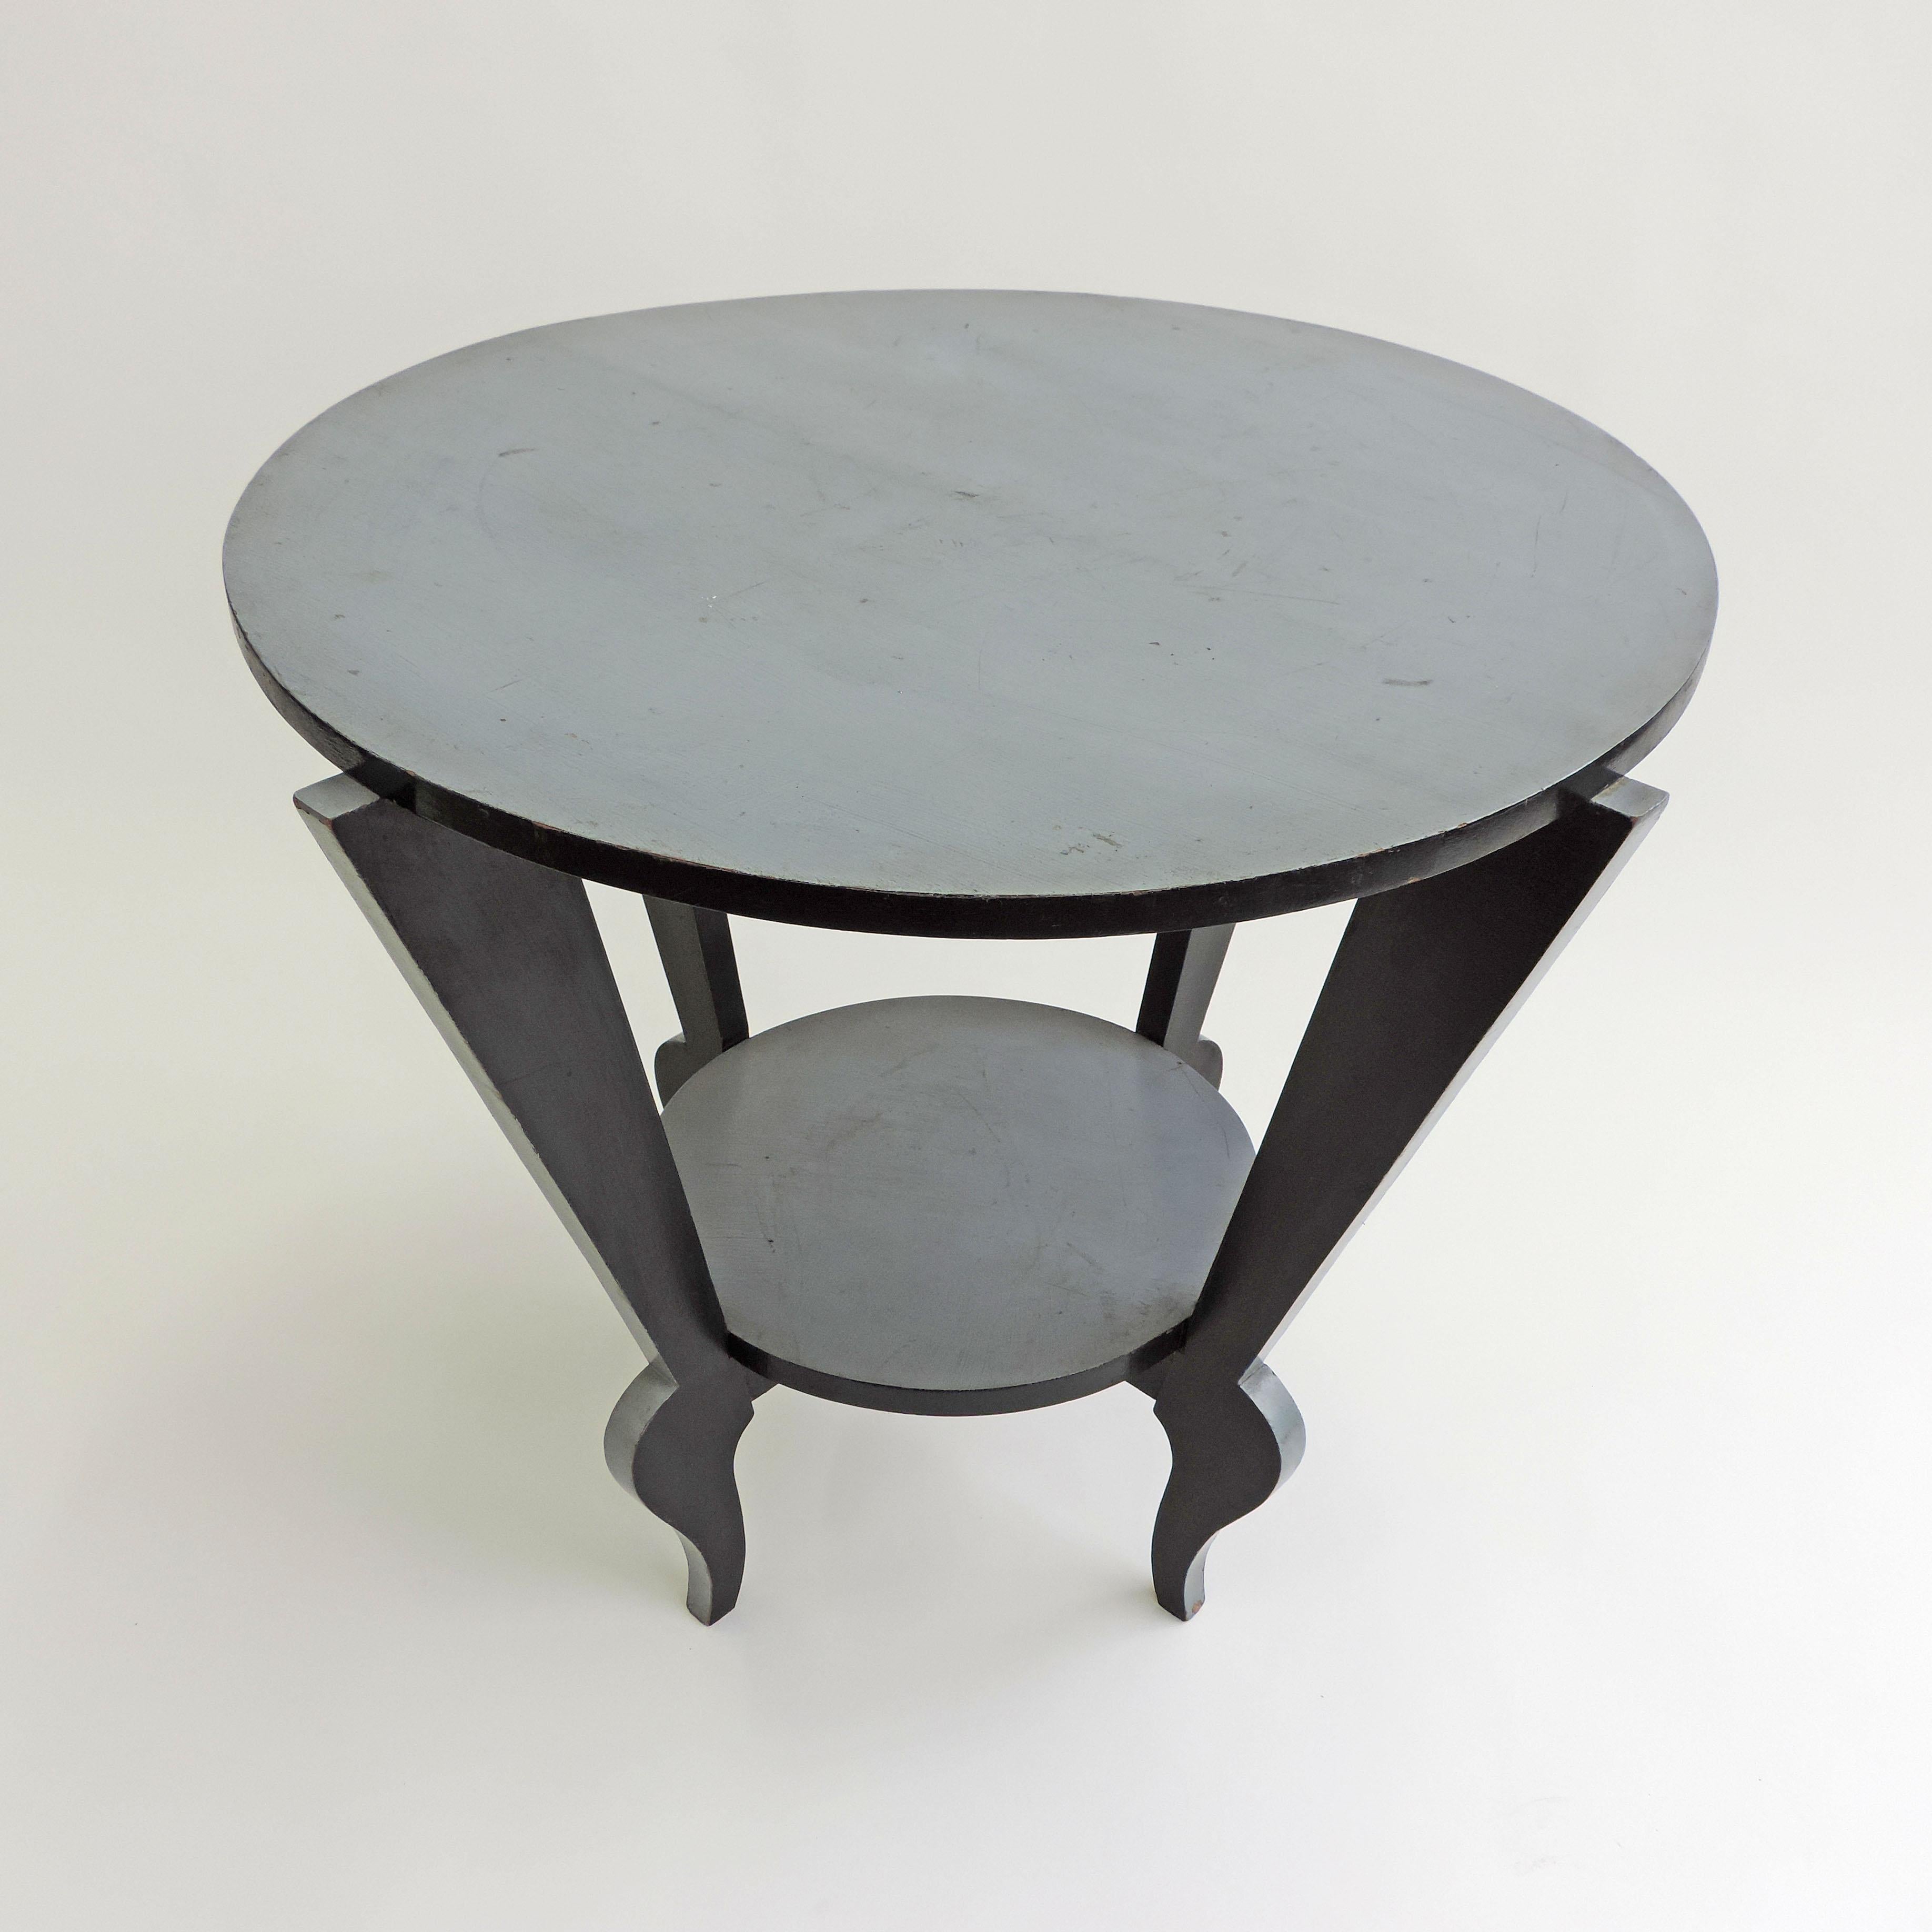 A beautiful example of Italian 'Futurism' Grey and Black painted centre table.

